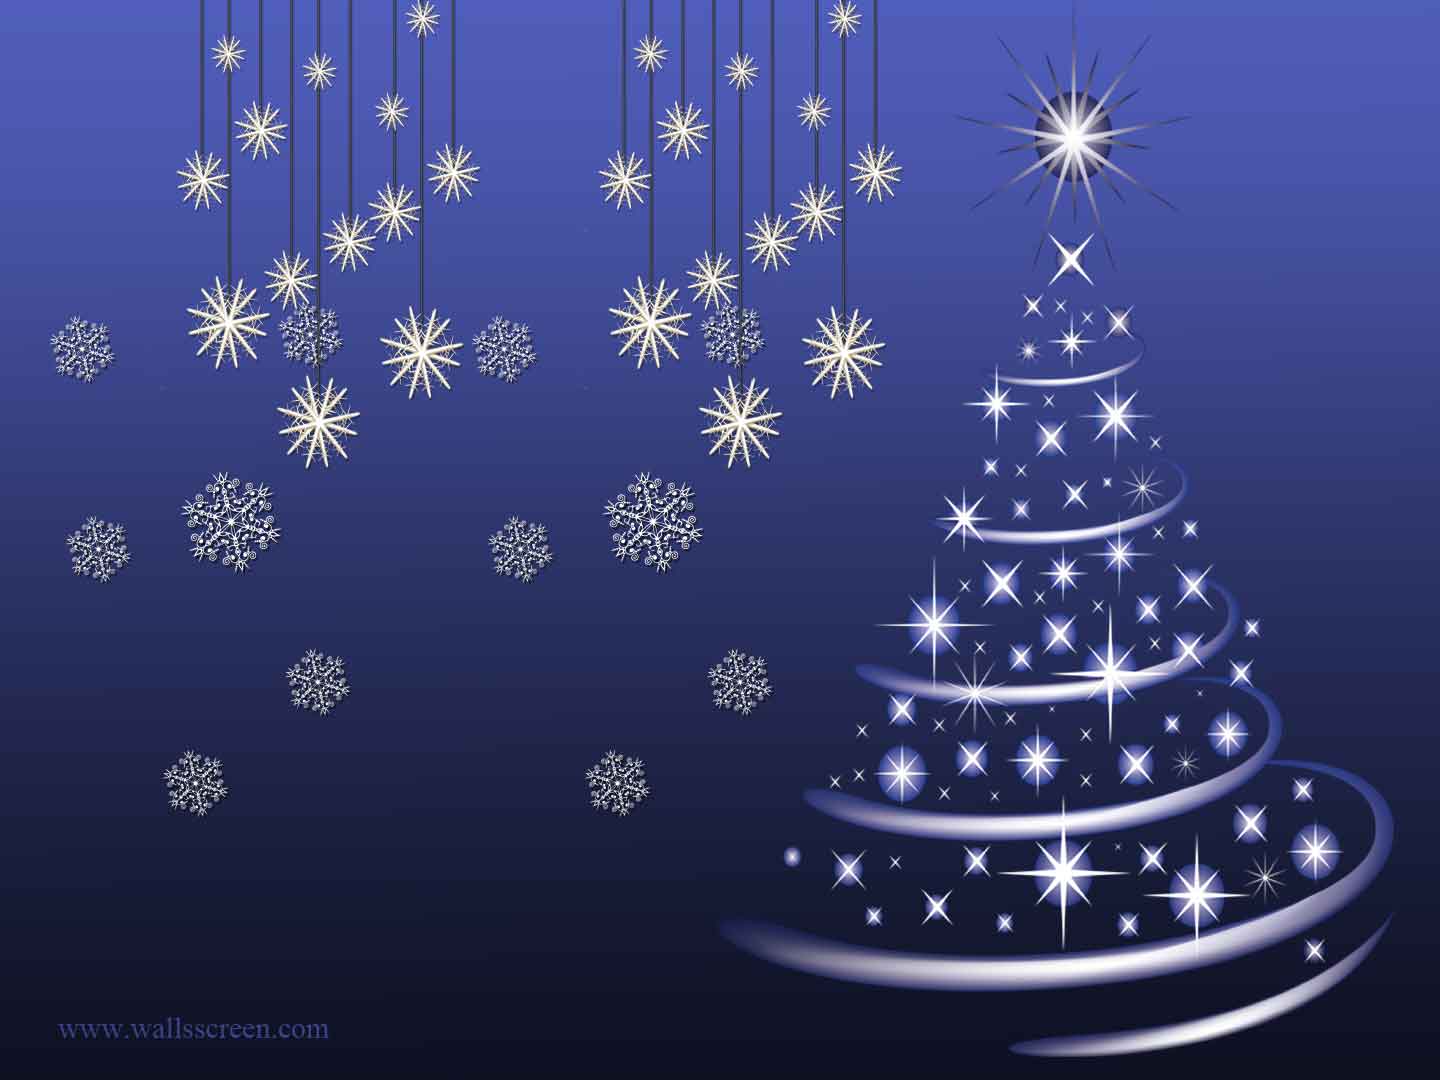 Merry Christmas Background Wallpaper 9348 HD Wallpaper Christmas Background Wallpaper HD Wallpaper & Background Download